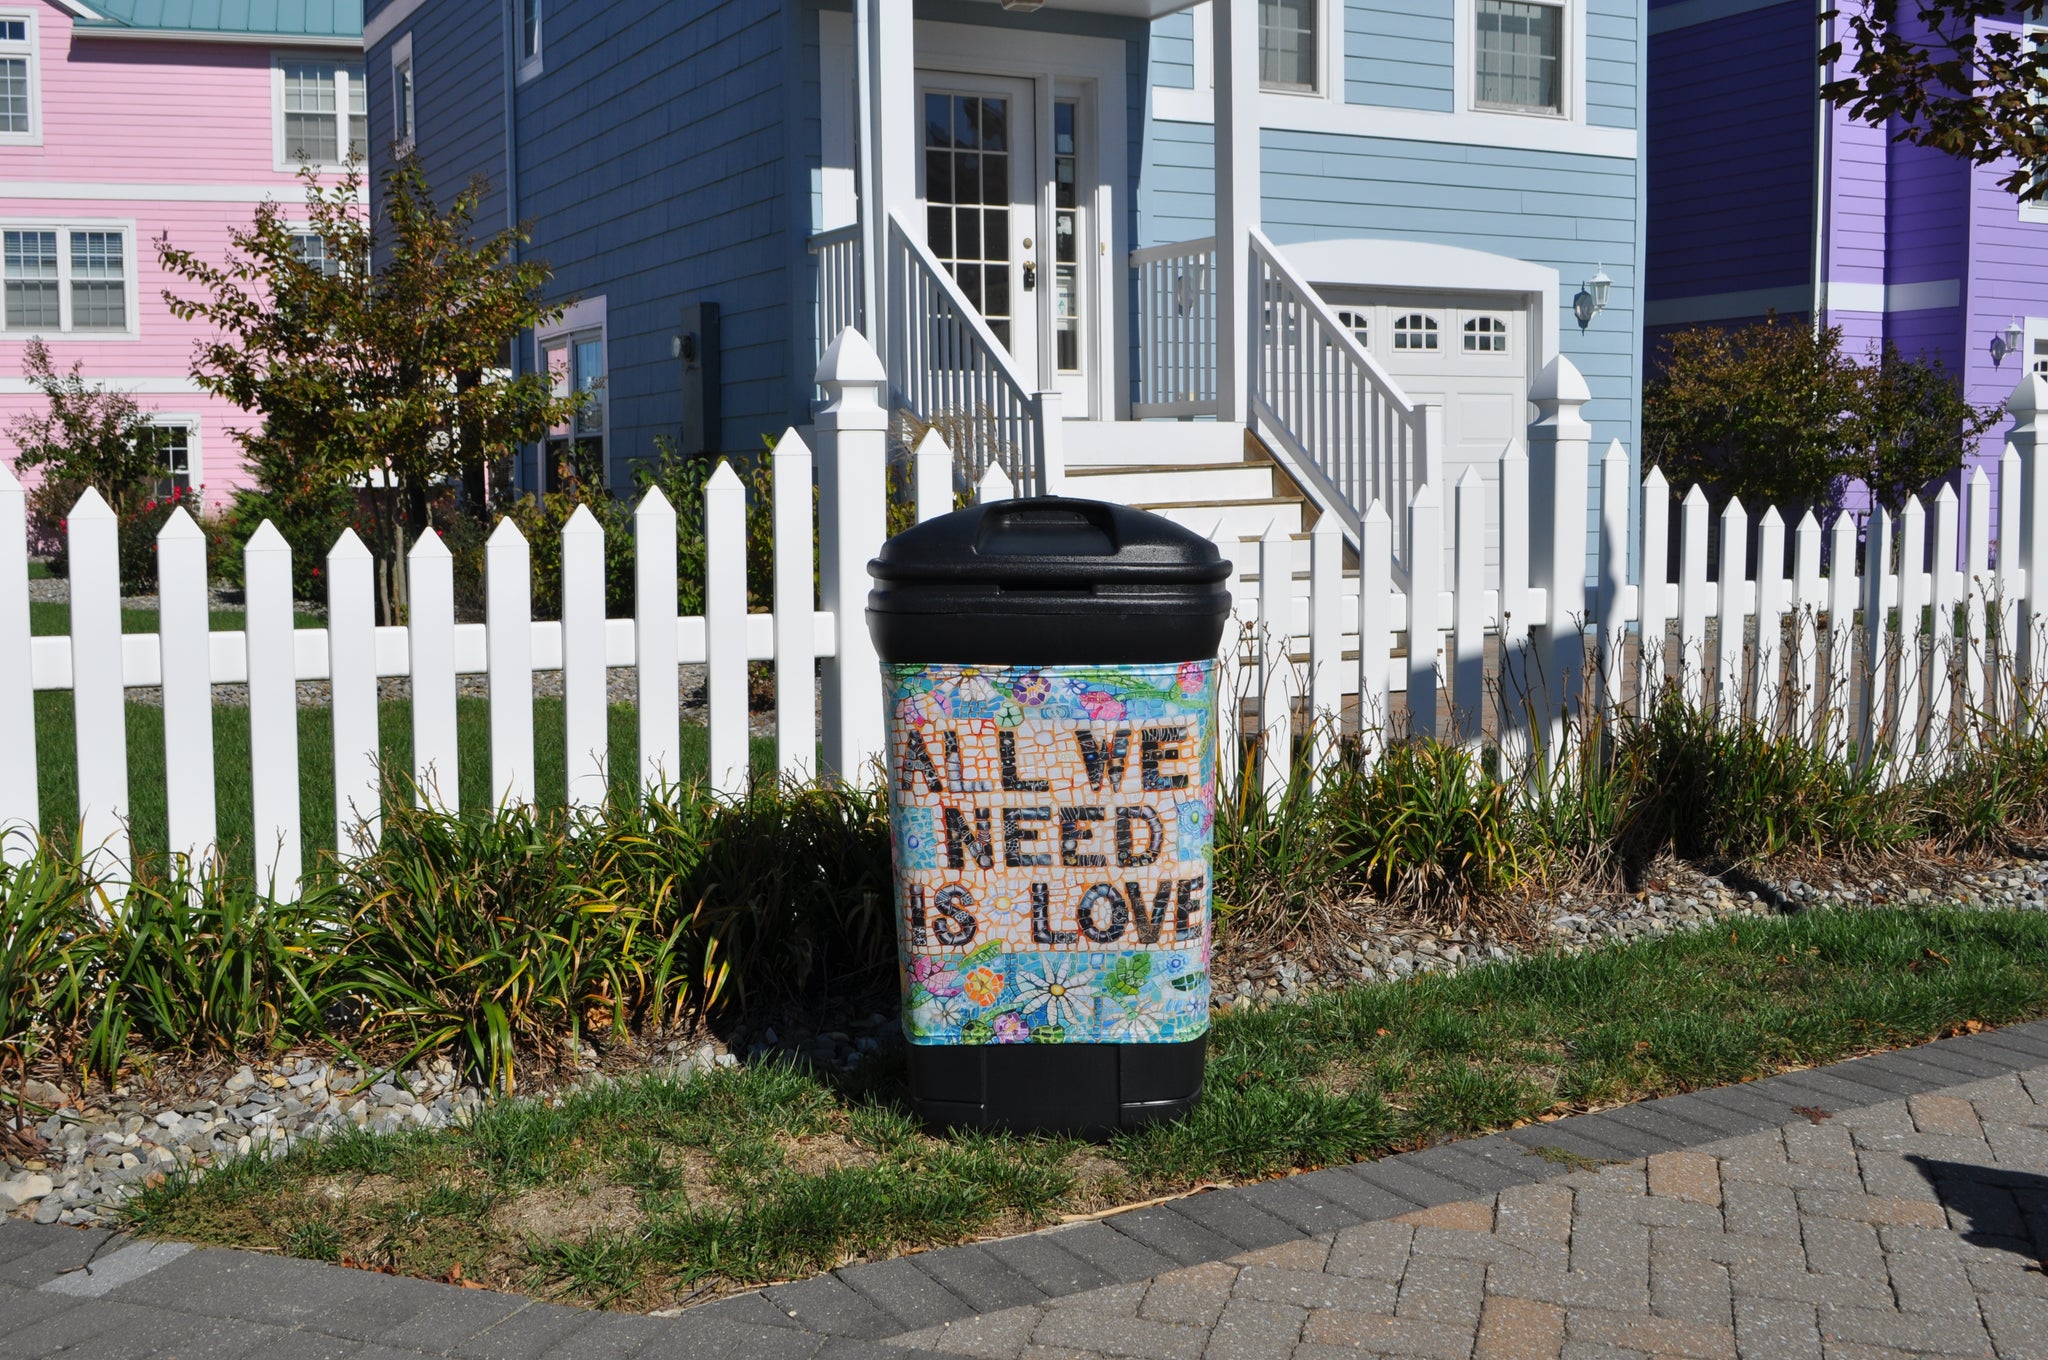 All We Need Is Love Cover   Browse Our Designer Trash Can Covers